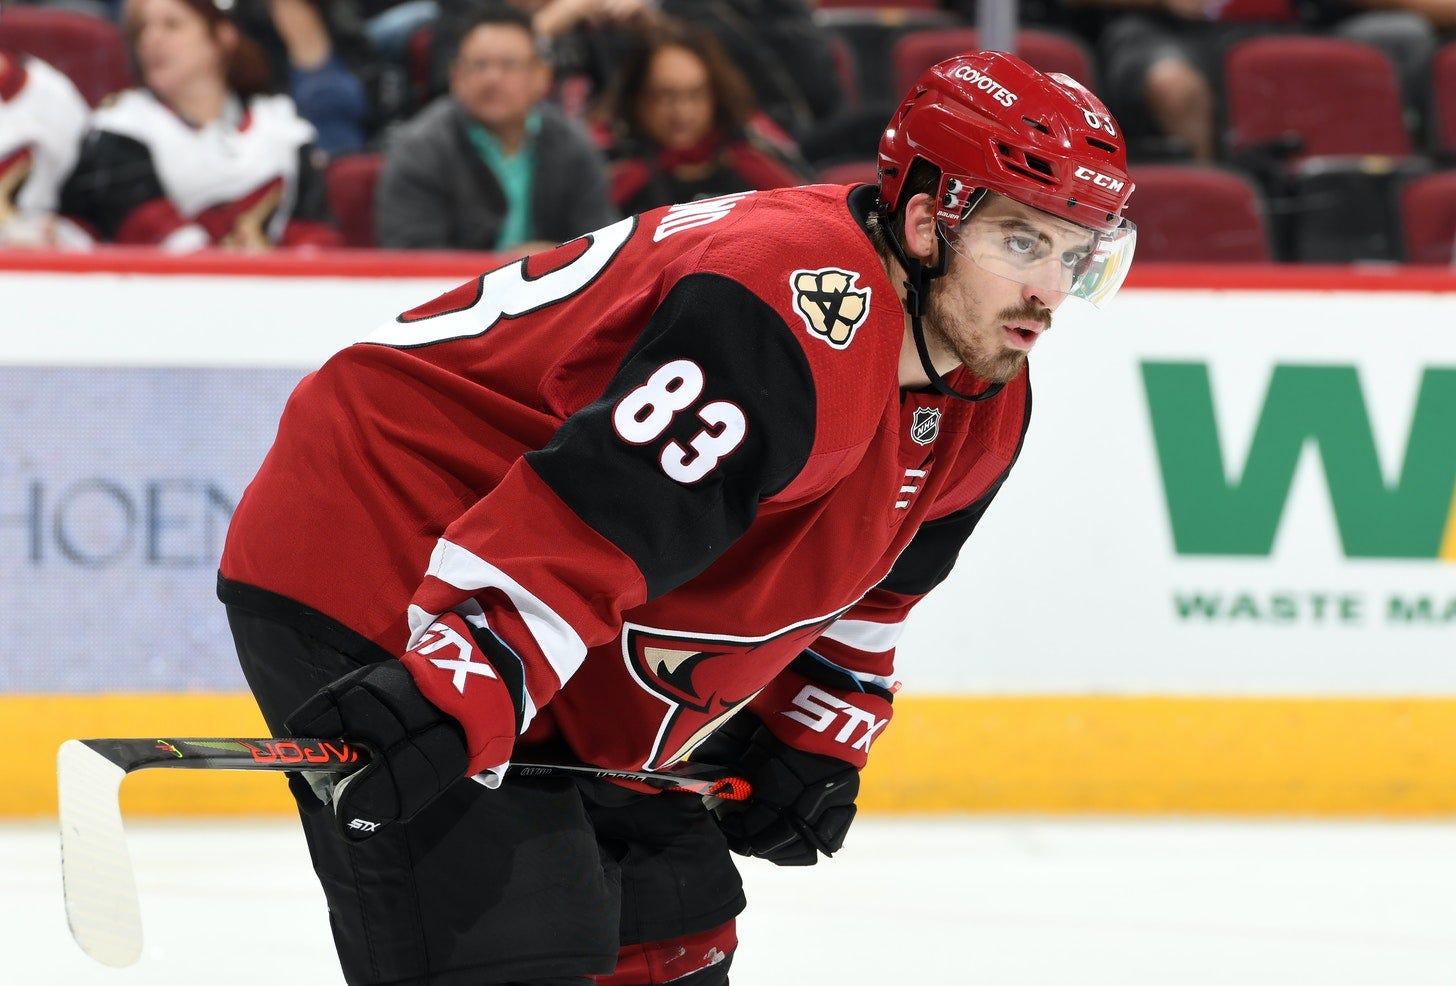 Coyotes vs. Blues: Injury Report - October 19